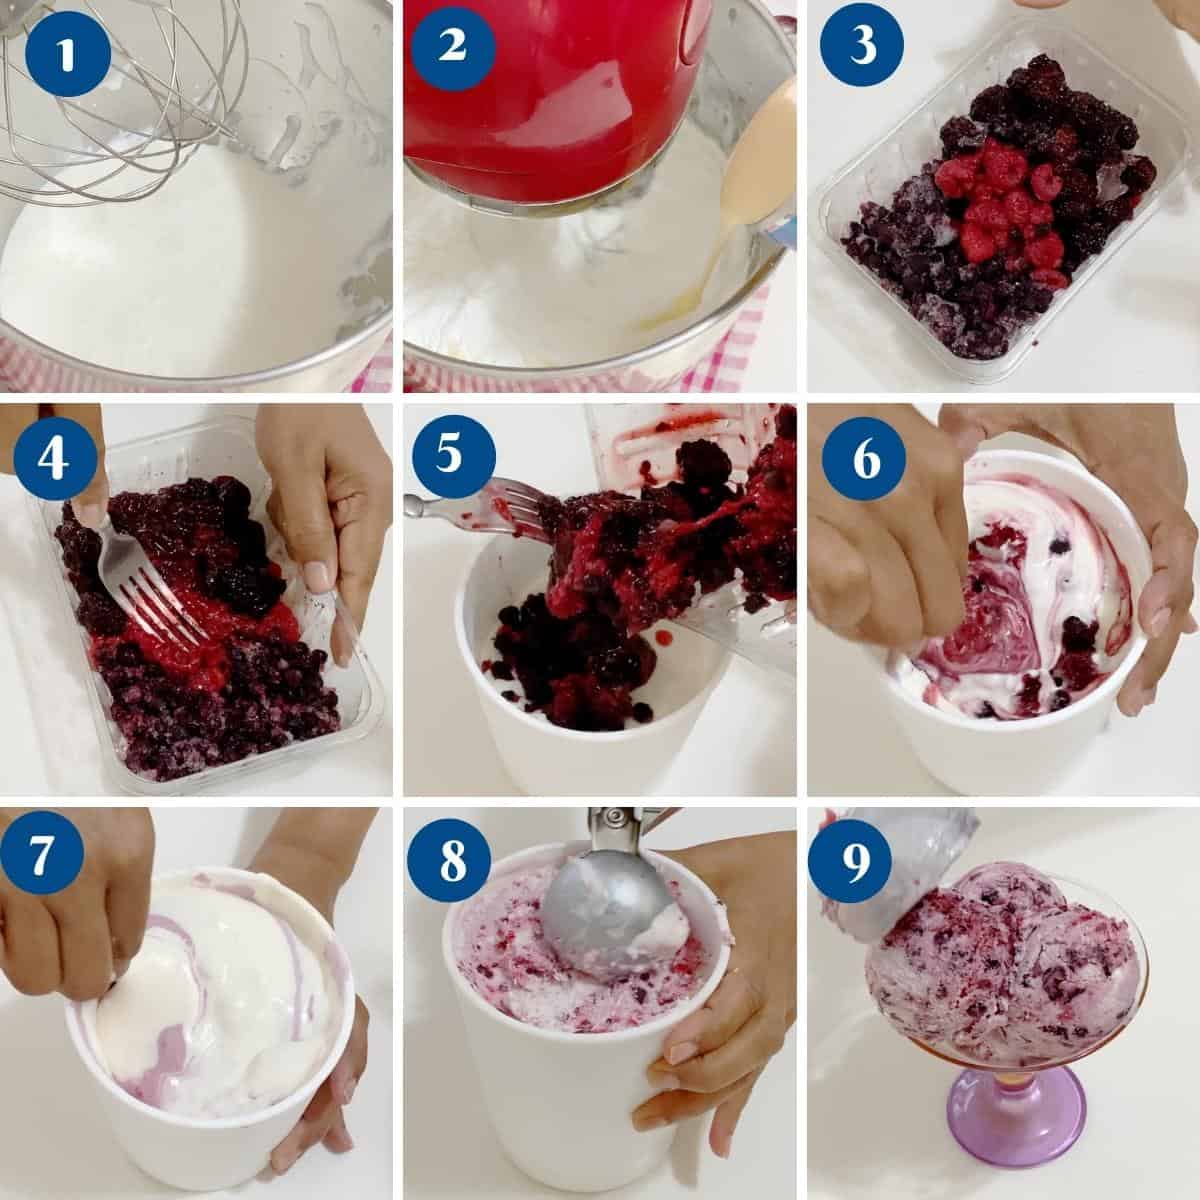 Progress Pictures making ice cream with mixed berry.